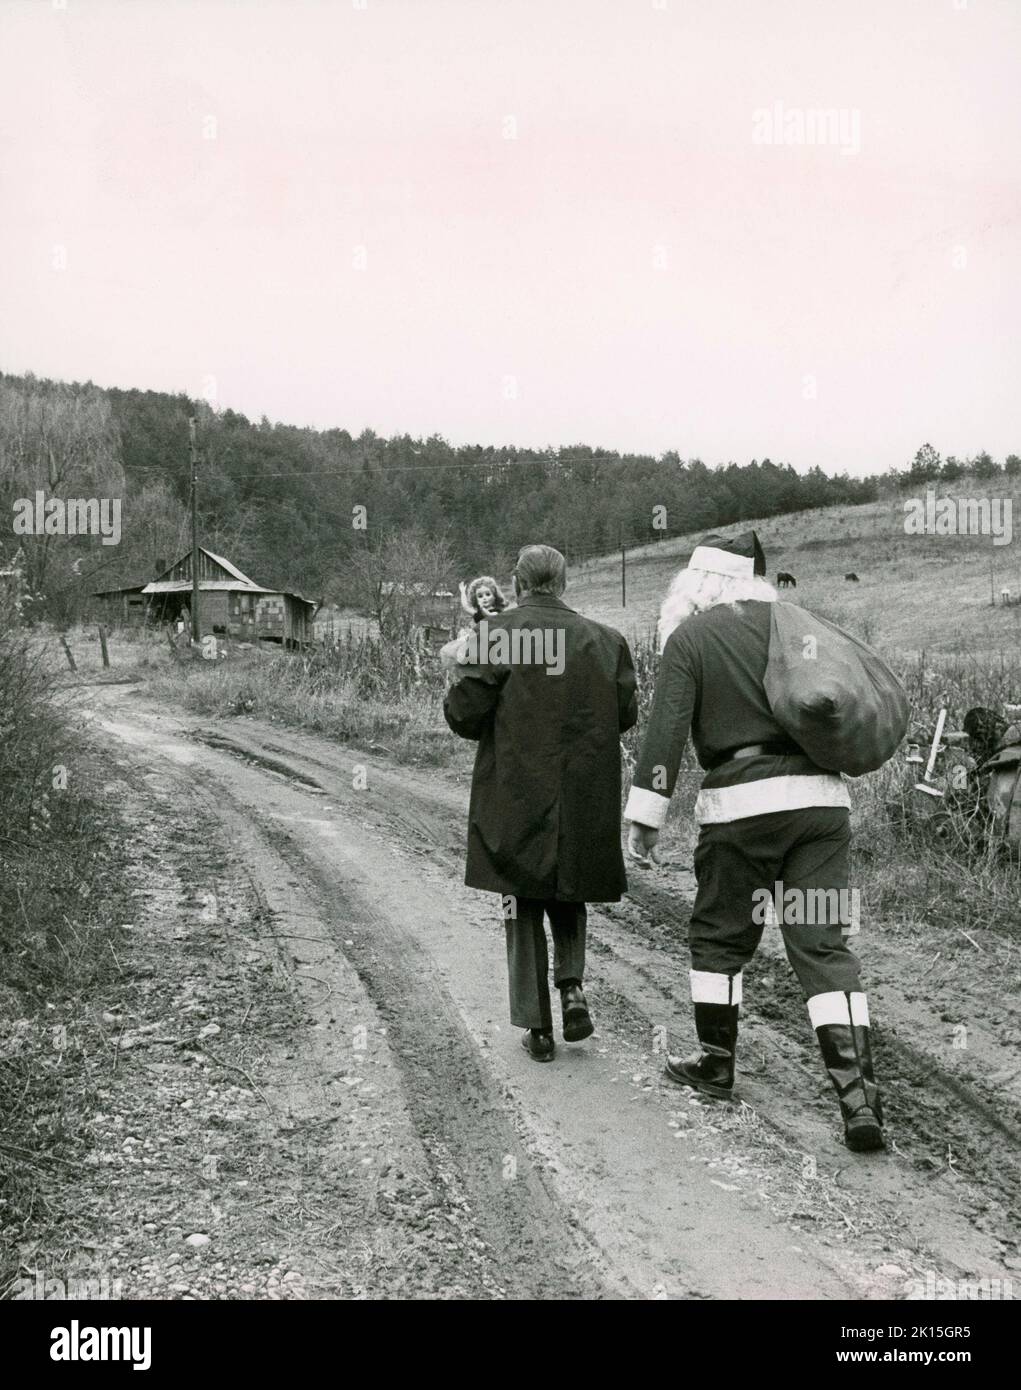 Santa Claus brings presents to children in Appalachia, thanks to the Parson of the Hills; 1965. The charity was set up to provide gifts to the children of the Appalachias. Here, the Parson and Santa come on foot, as the road was not passable for the truck. Stock Photo